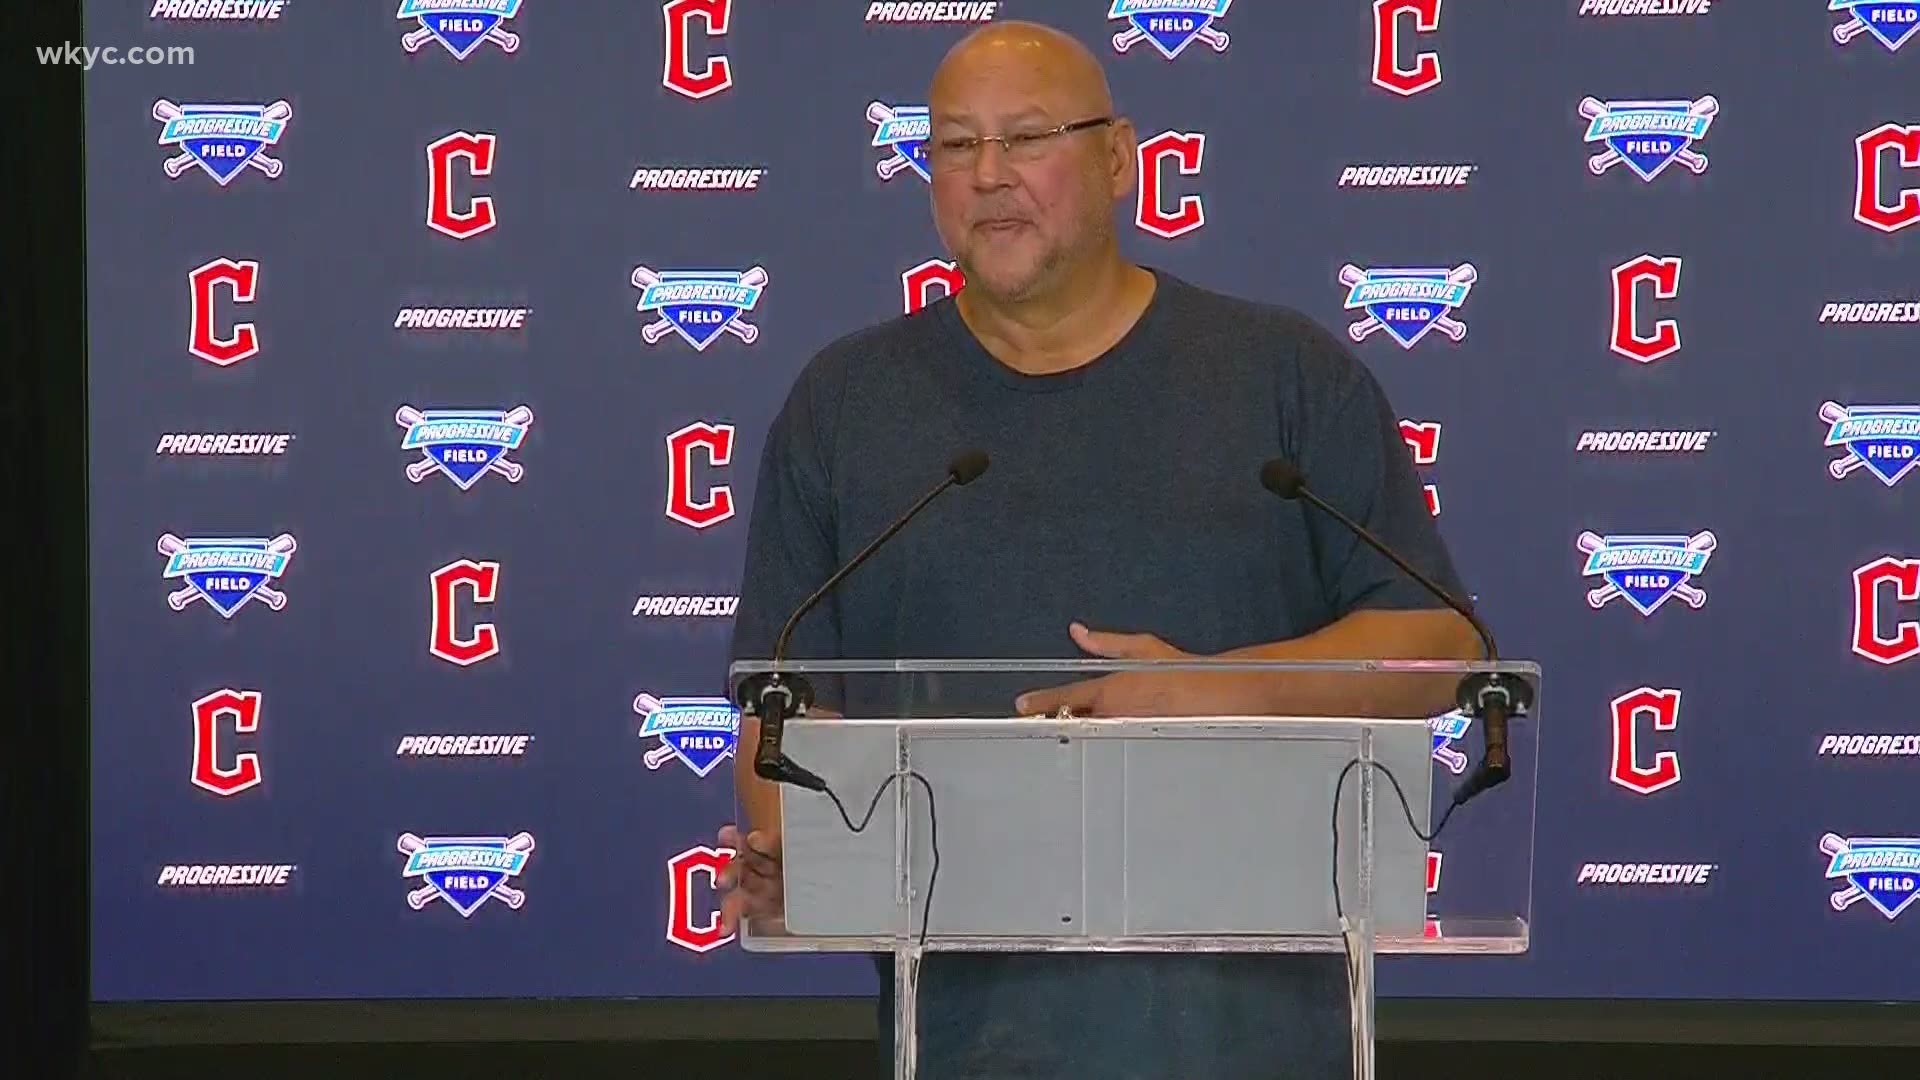 The Indians will become the Guardians after the 2021 season. The team held a briefing at Progressive Field to discuss the change on Friday.